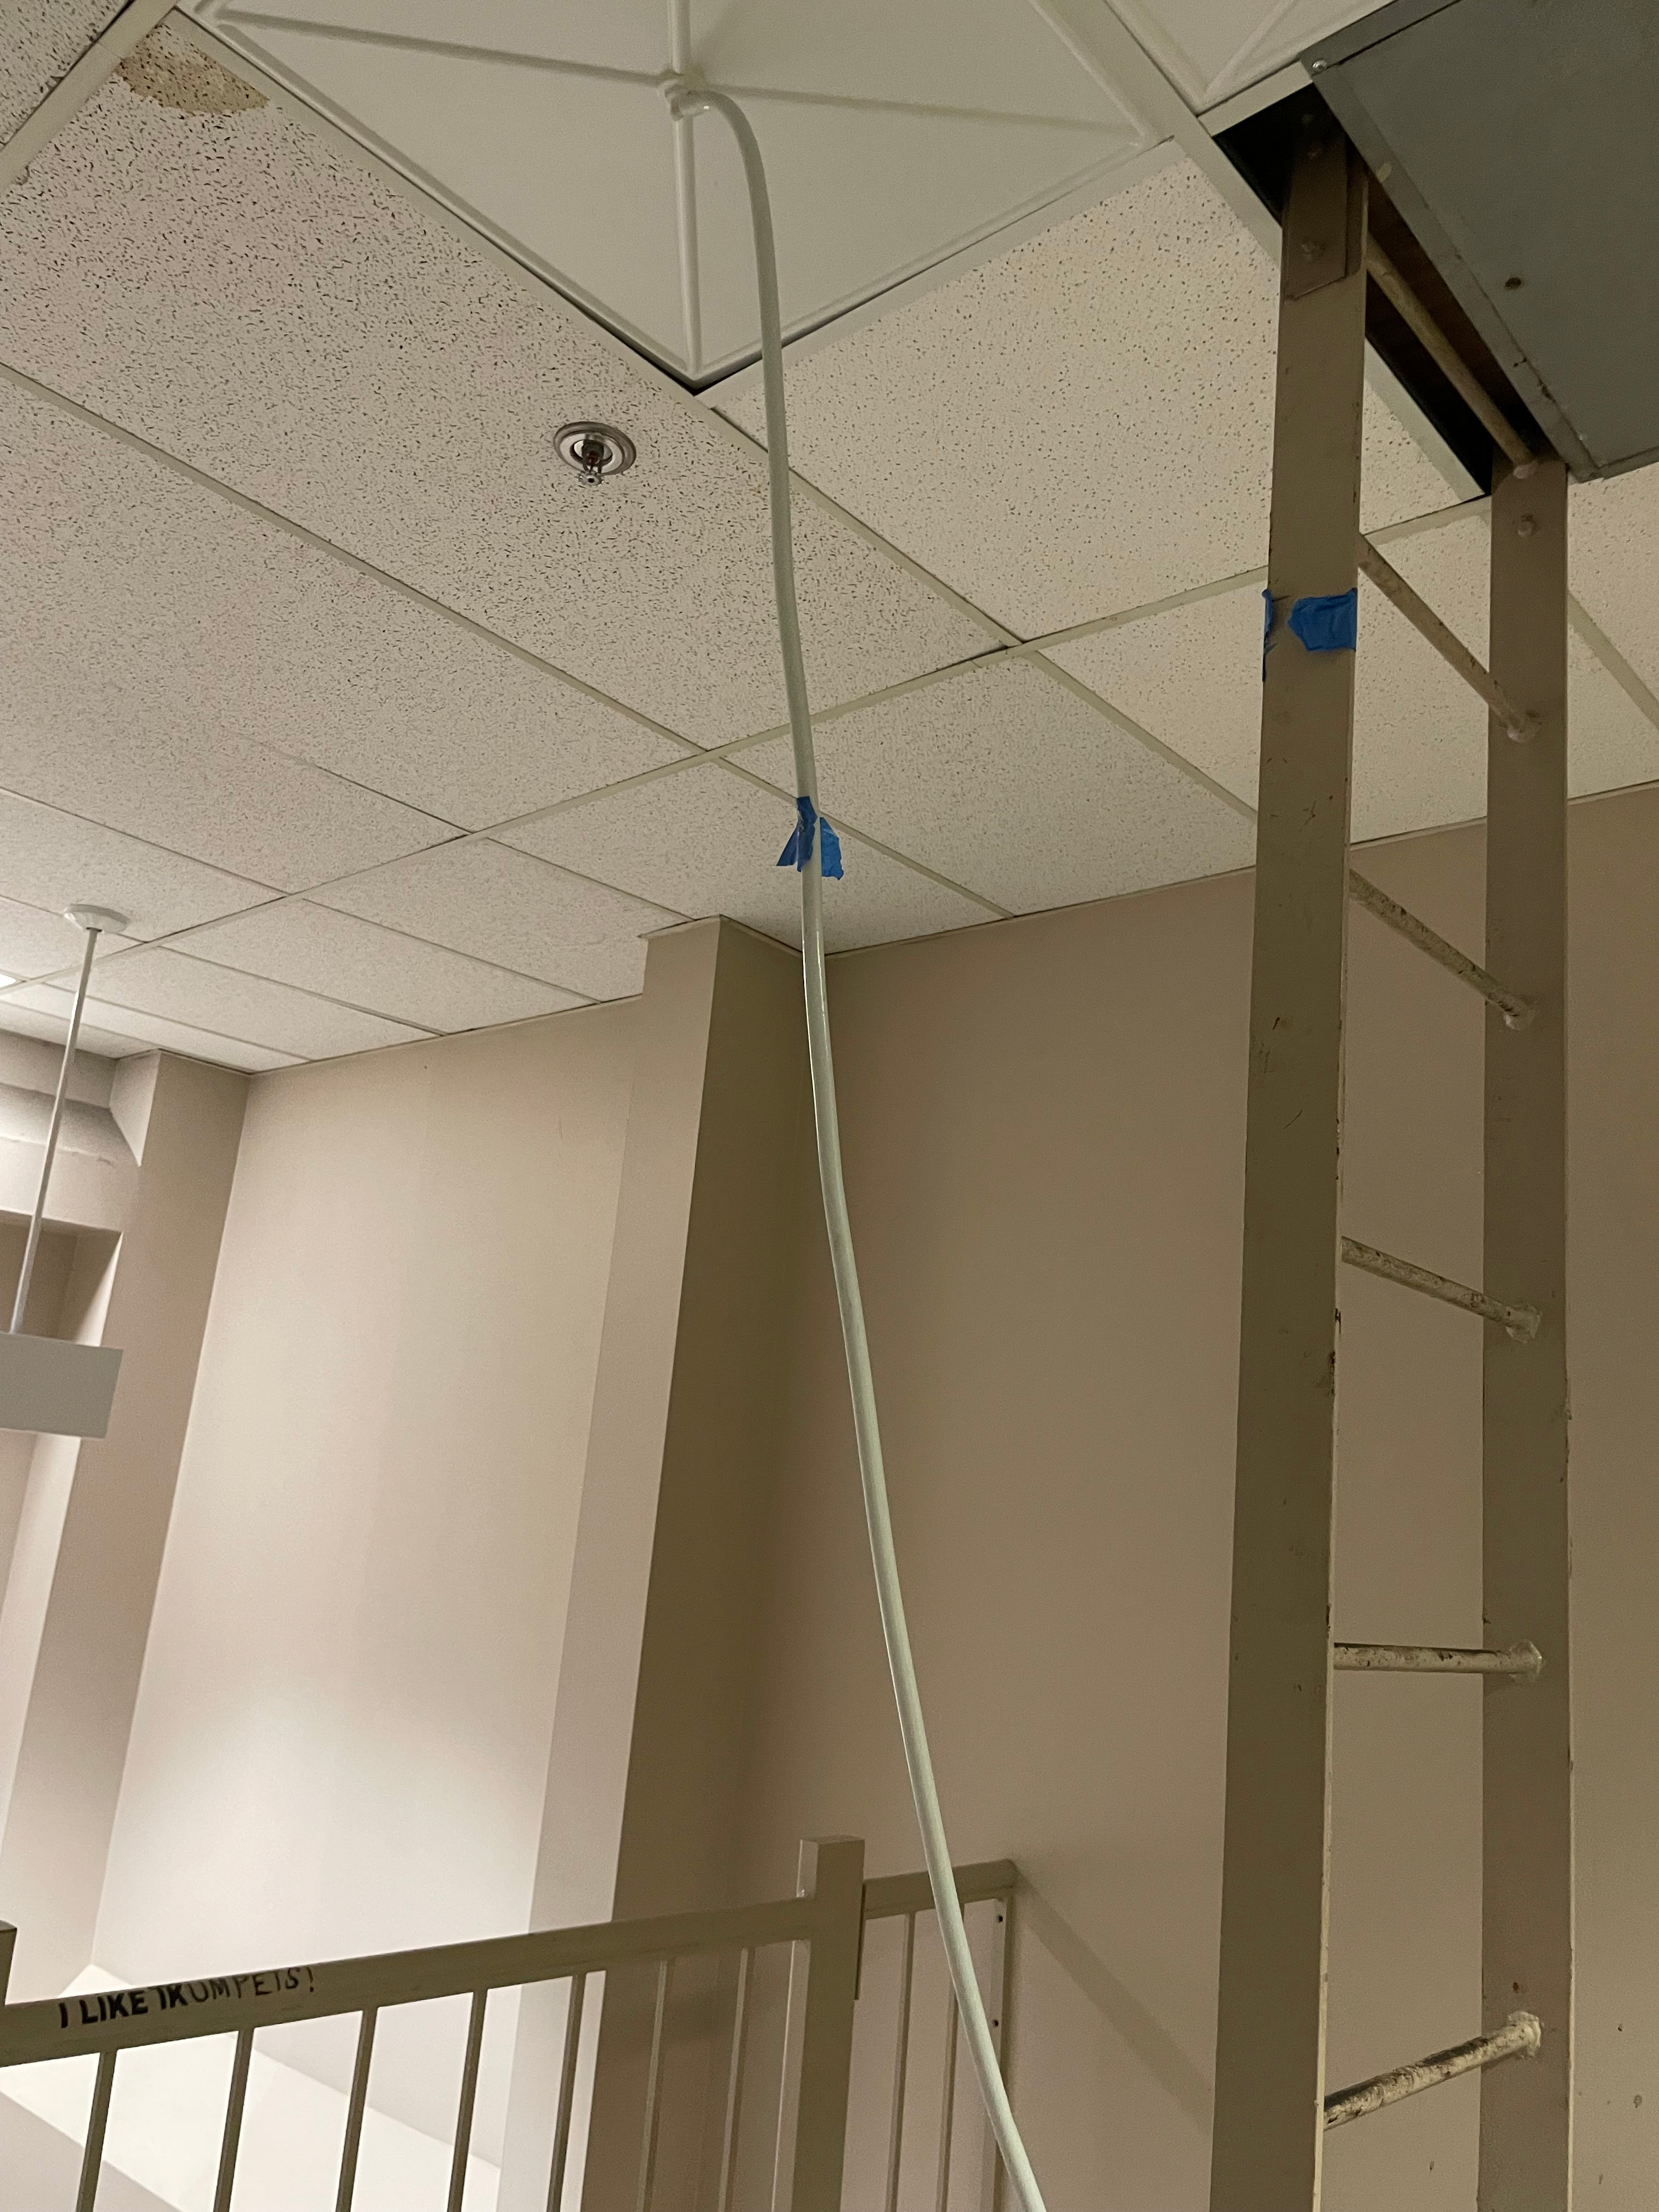 A long white hose dangles from the ceiling into buckets on the floor, according to union president Beverly Anderson the May 9 2024 photo was taken in Building 18. (Courtesy of Beverly Anderson)